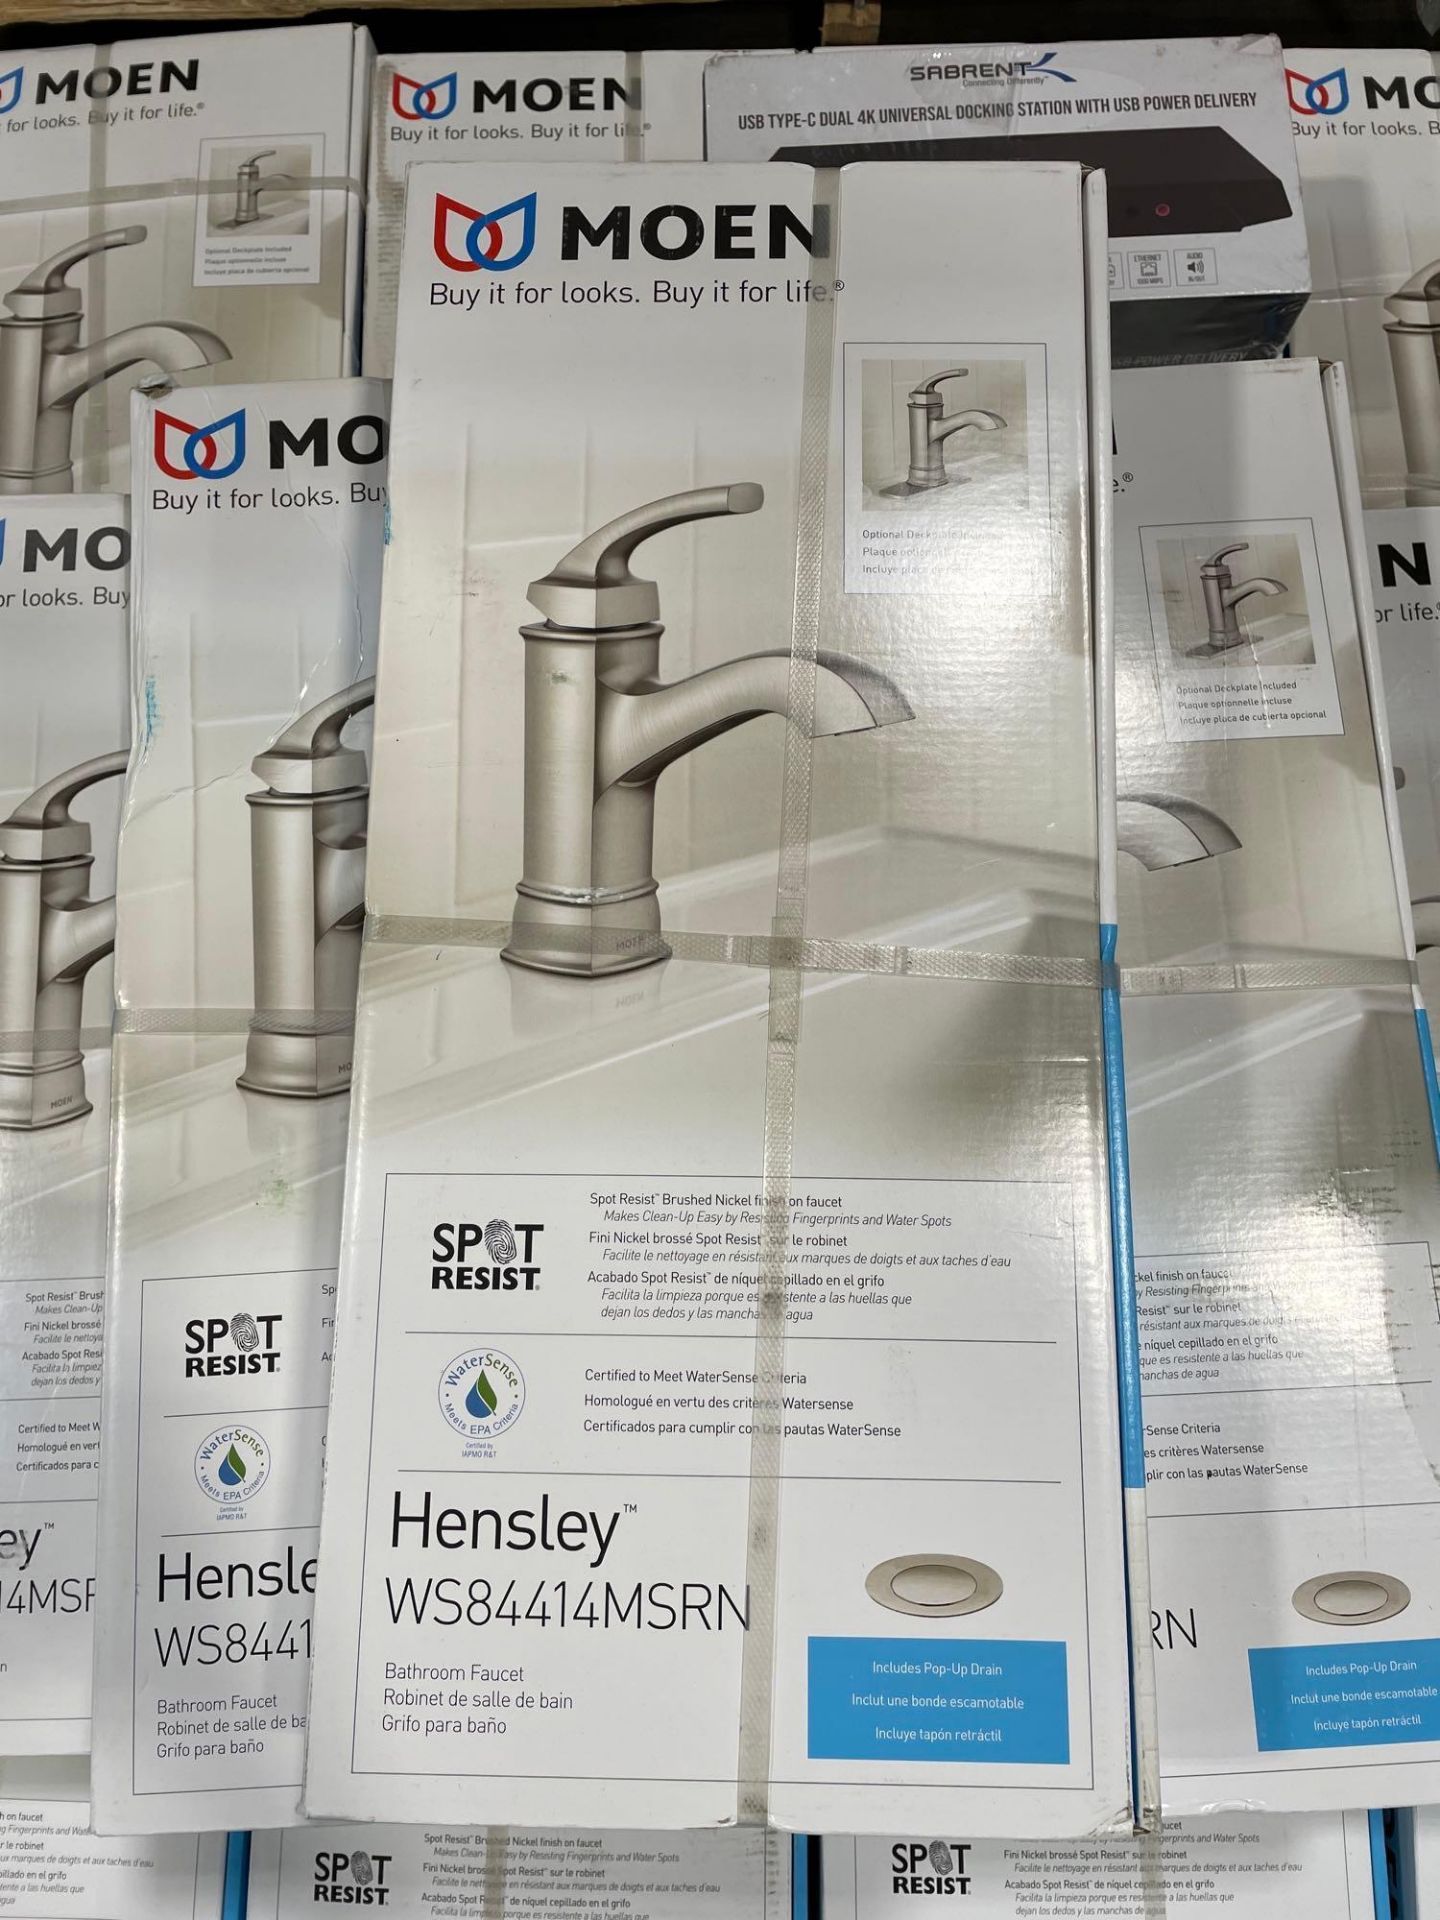 Moen Hensley Faucets, Sabrent Powered Dock, and more - Image 2 of 13